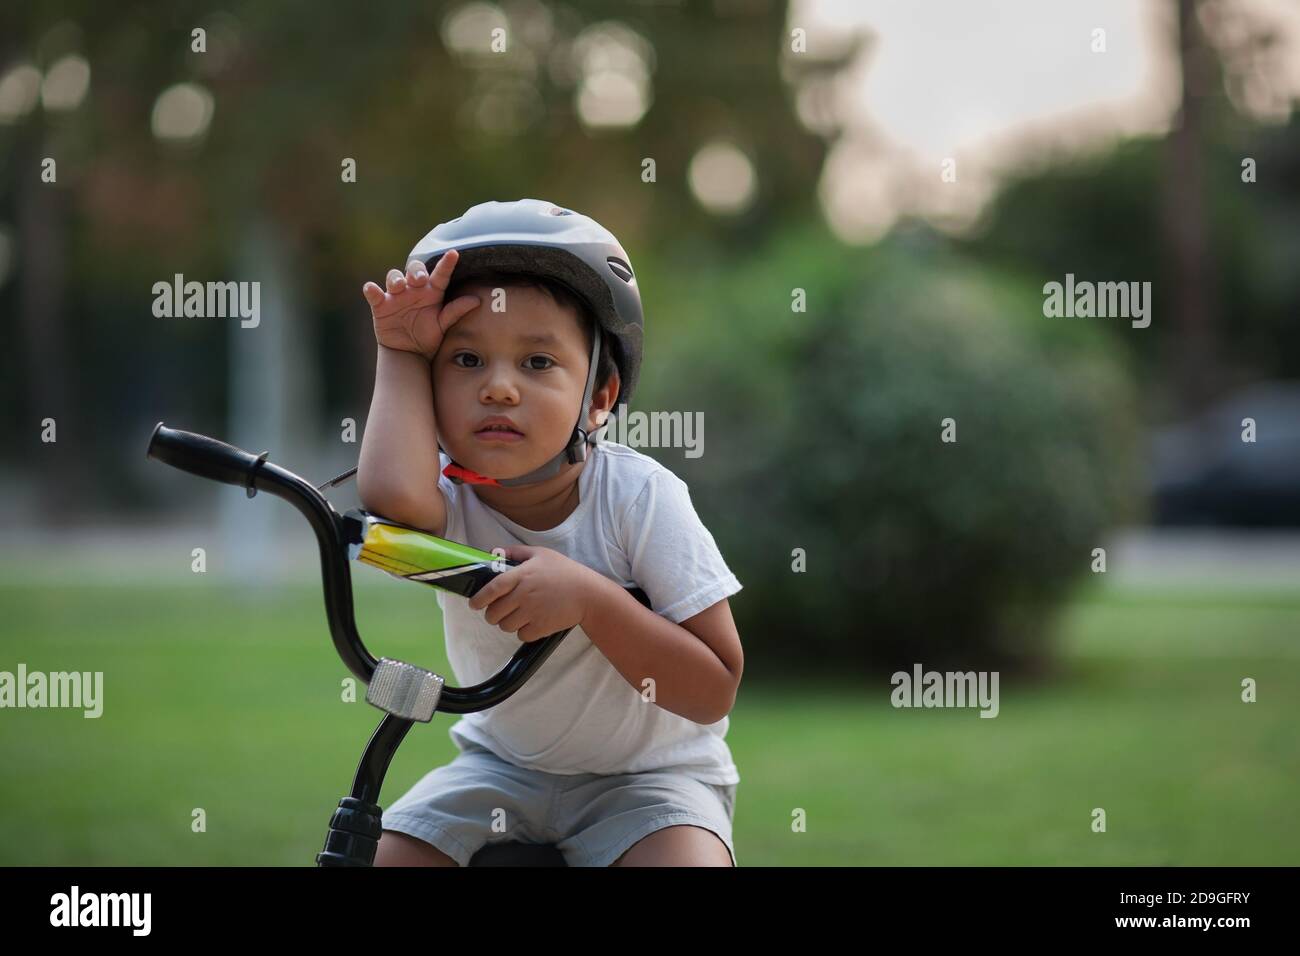 A little kid who looks exhausted or shows the difficulty in riding a bike for the first time by holding his hand to his forehead and looking unhappy. Stock Photo